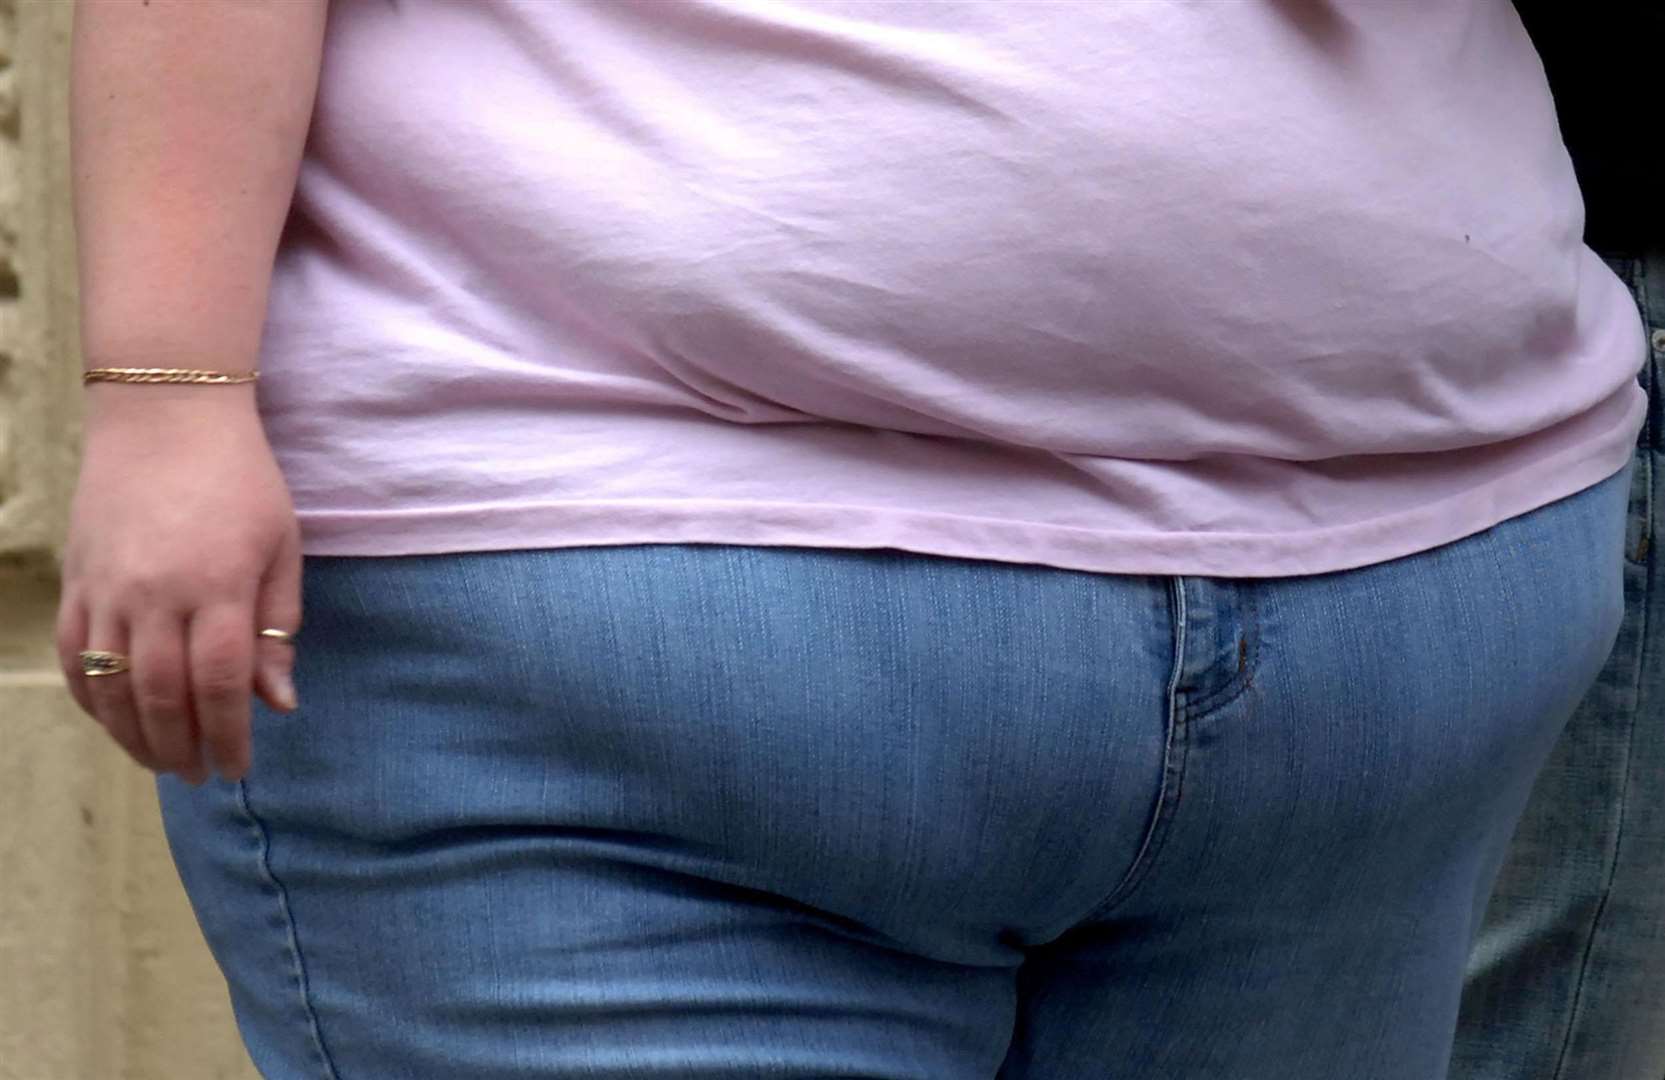 Obesity has emerged as one of the biggest risk factors for Covid-19 (Clara Molden/PA)